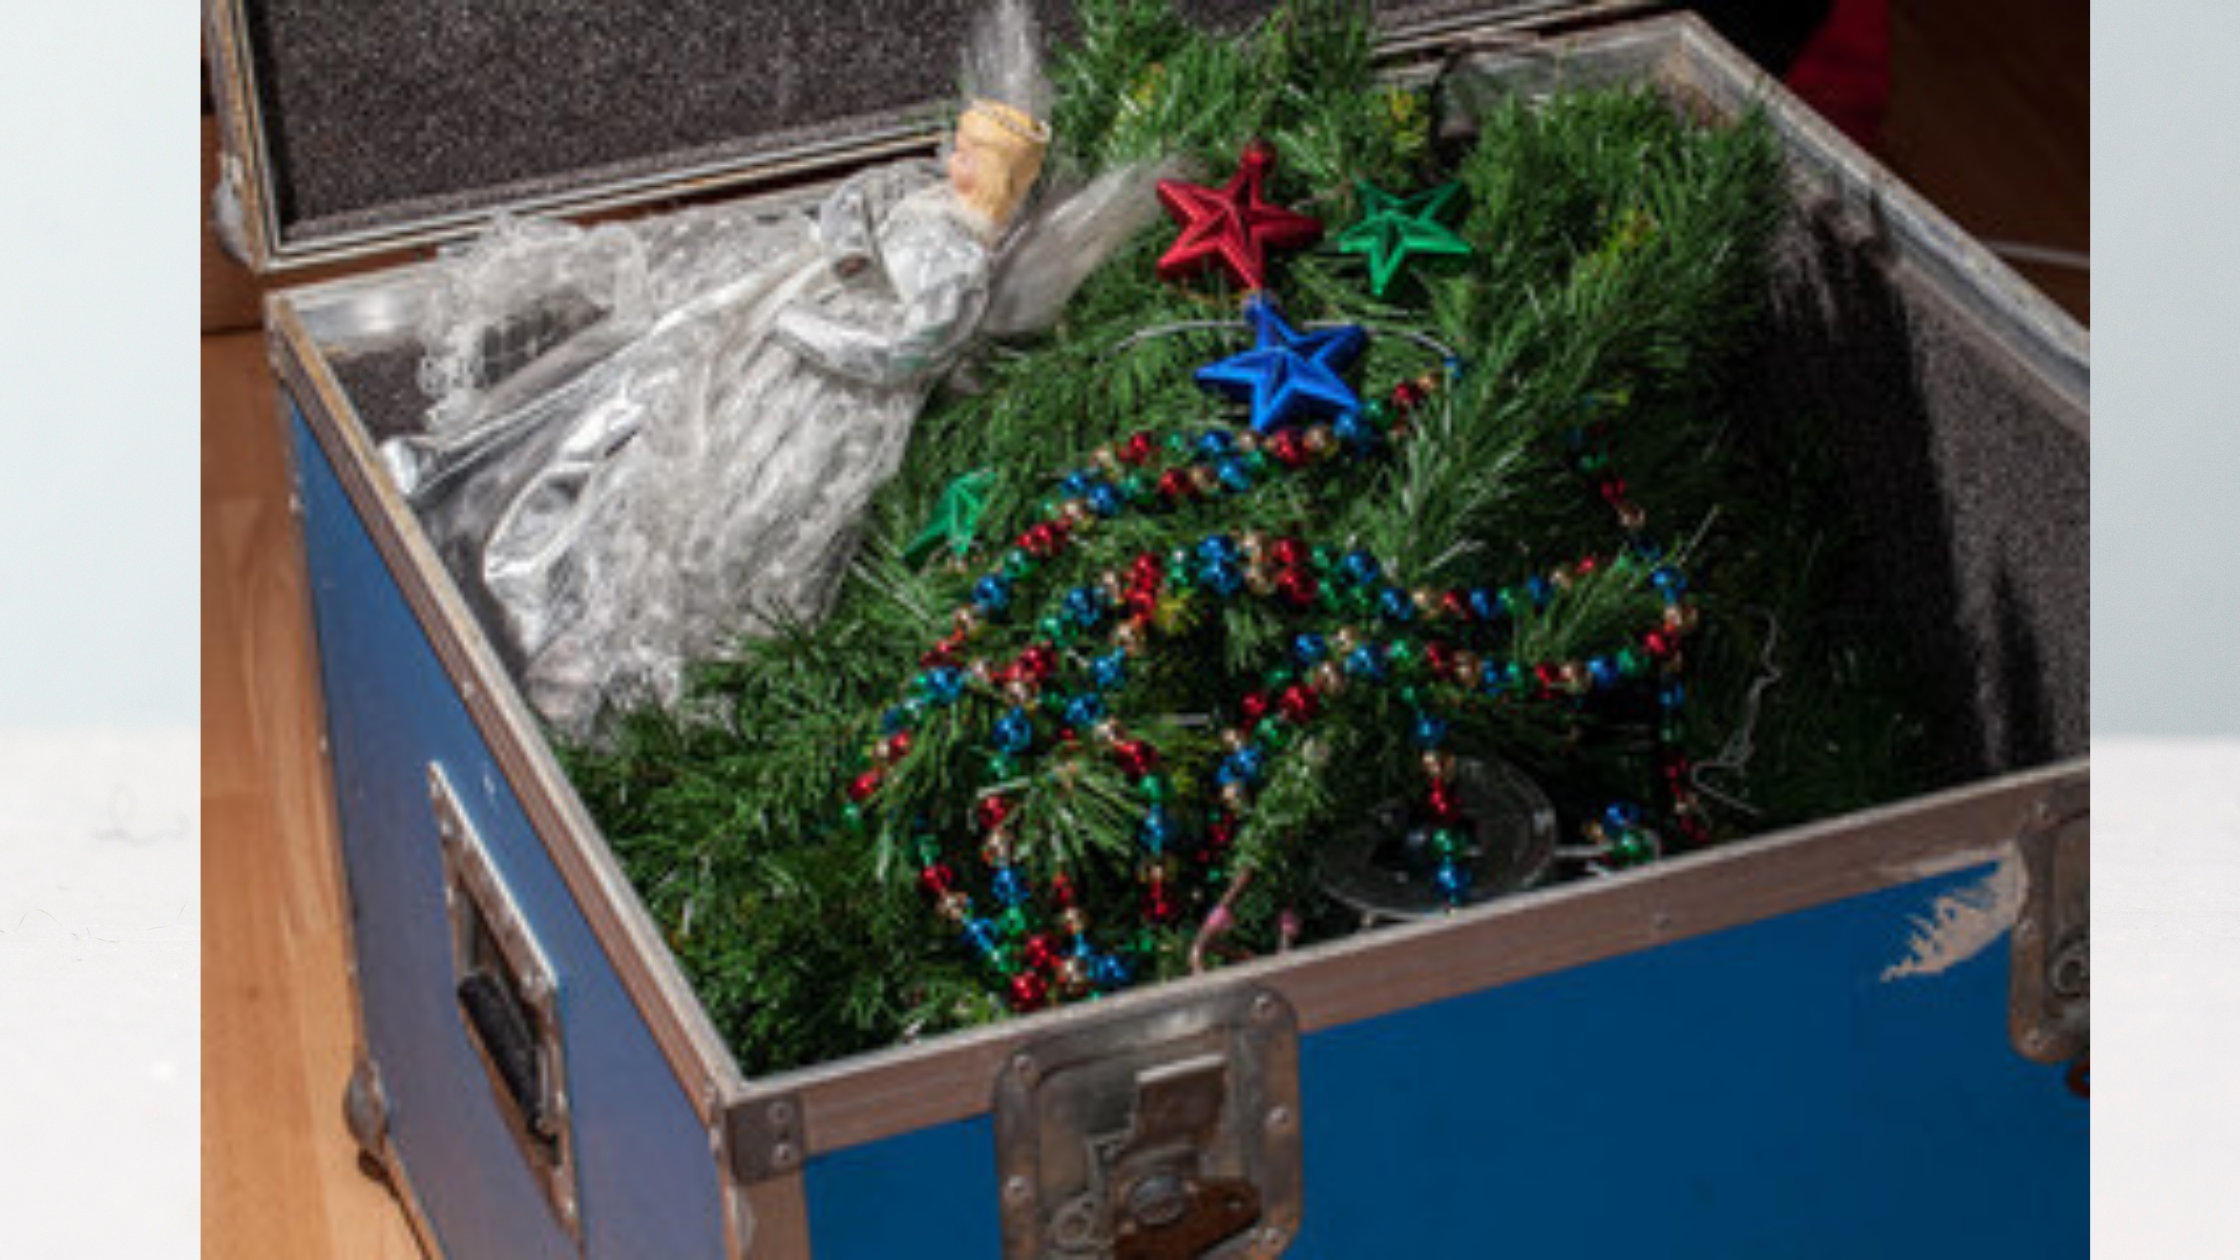 Christmas decorations packed in box.